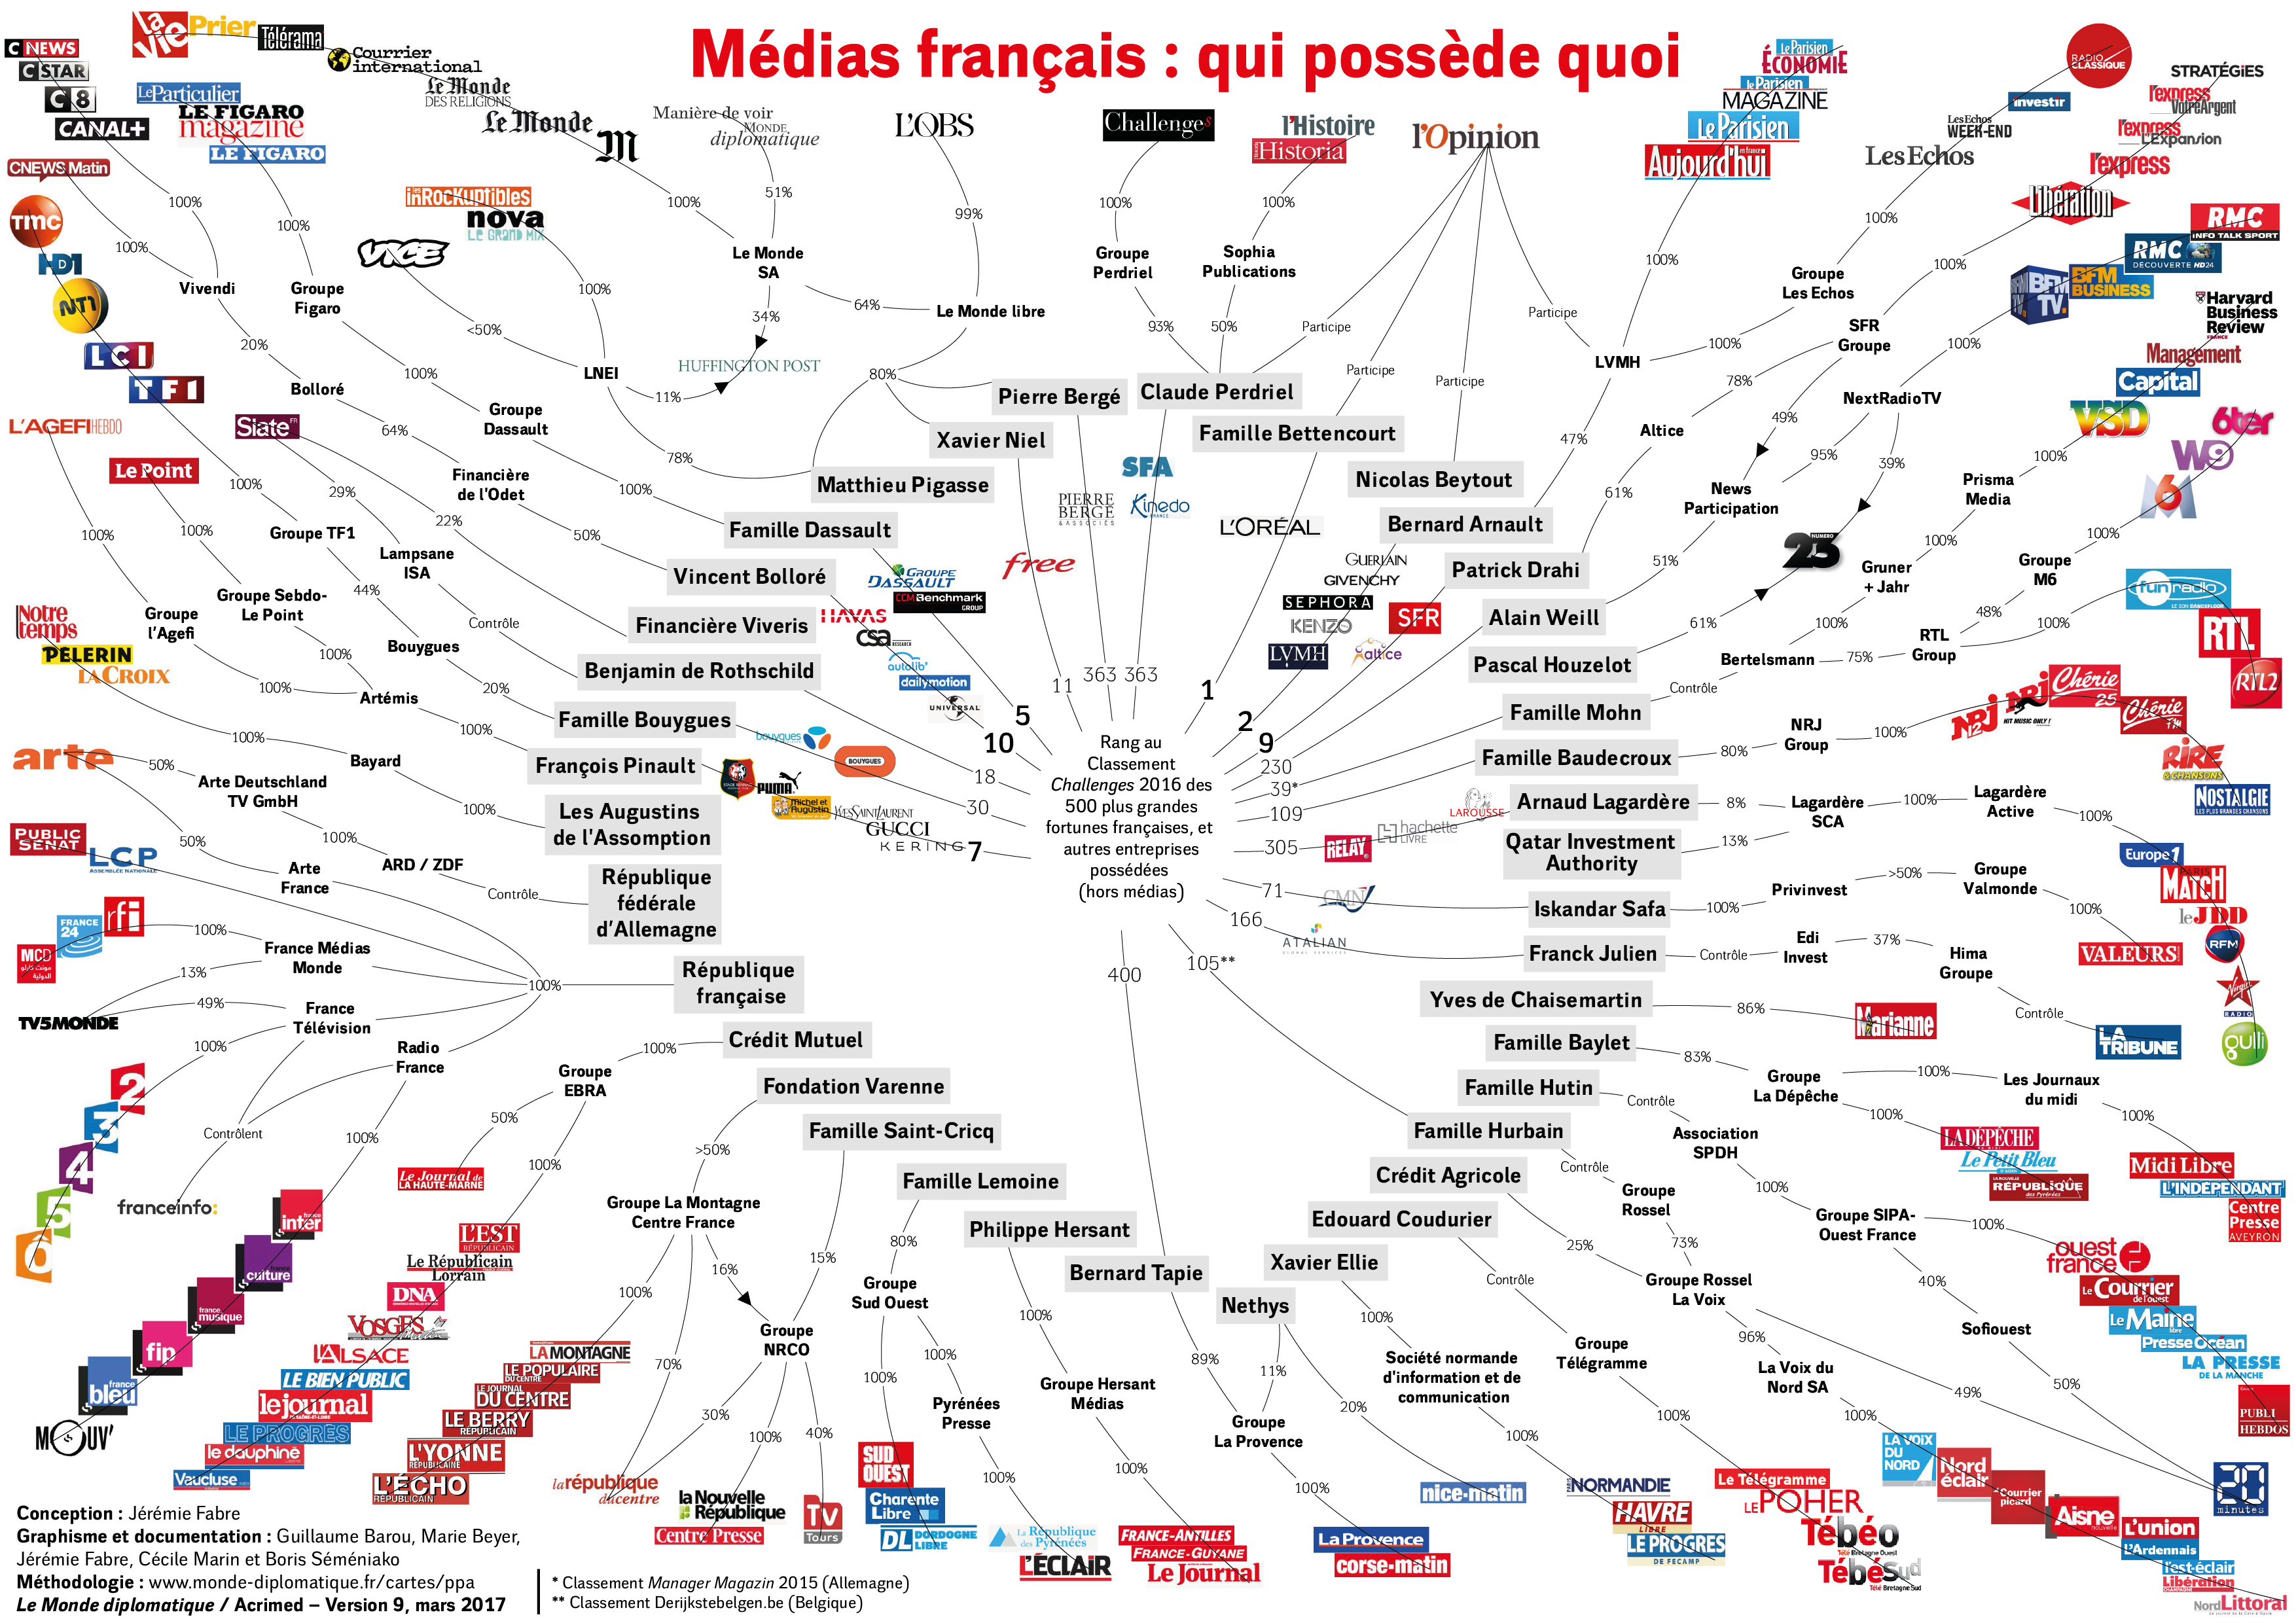 French medias: who owns what? Source: Le Monde Diplomatique